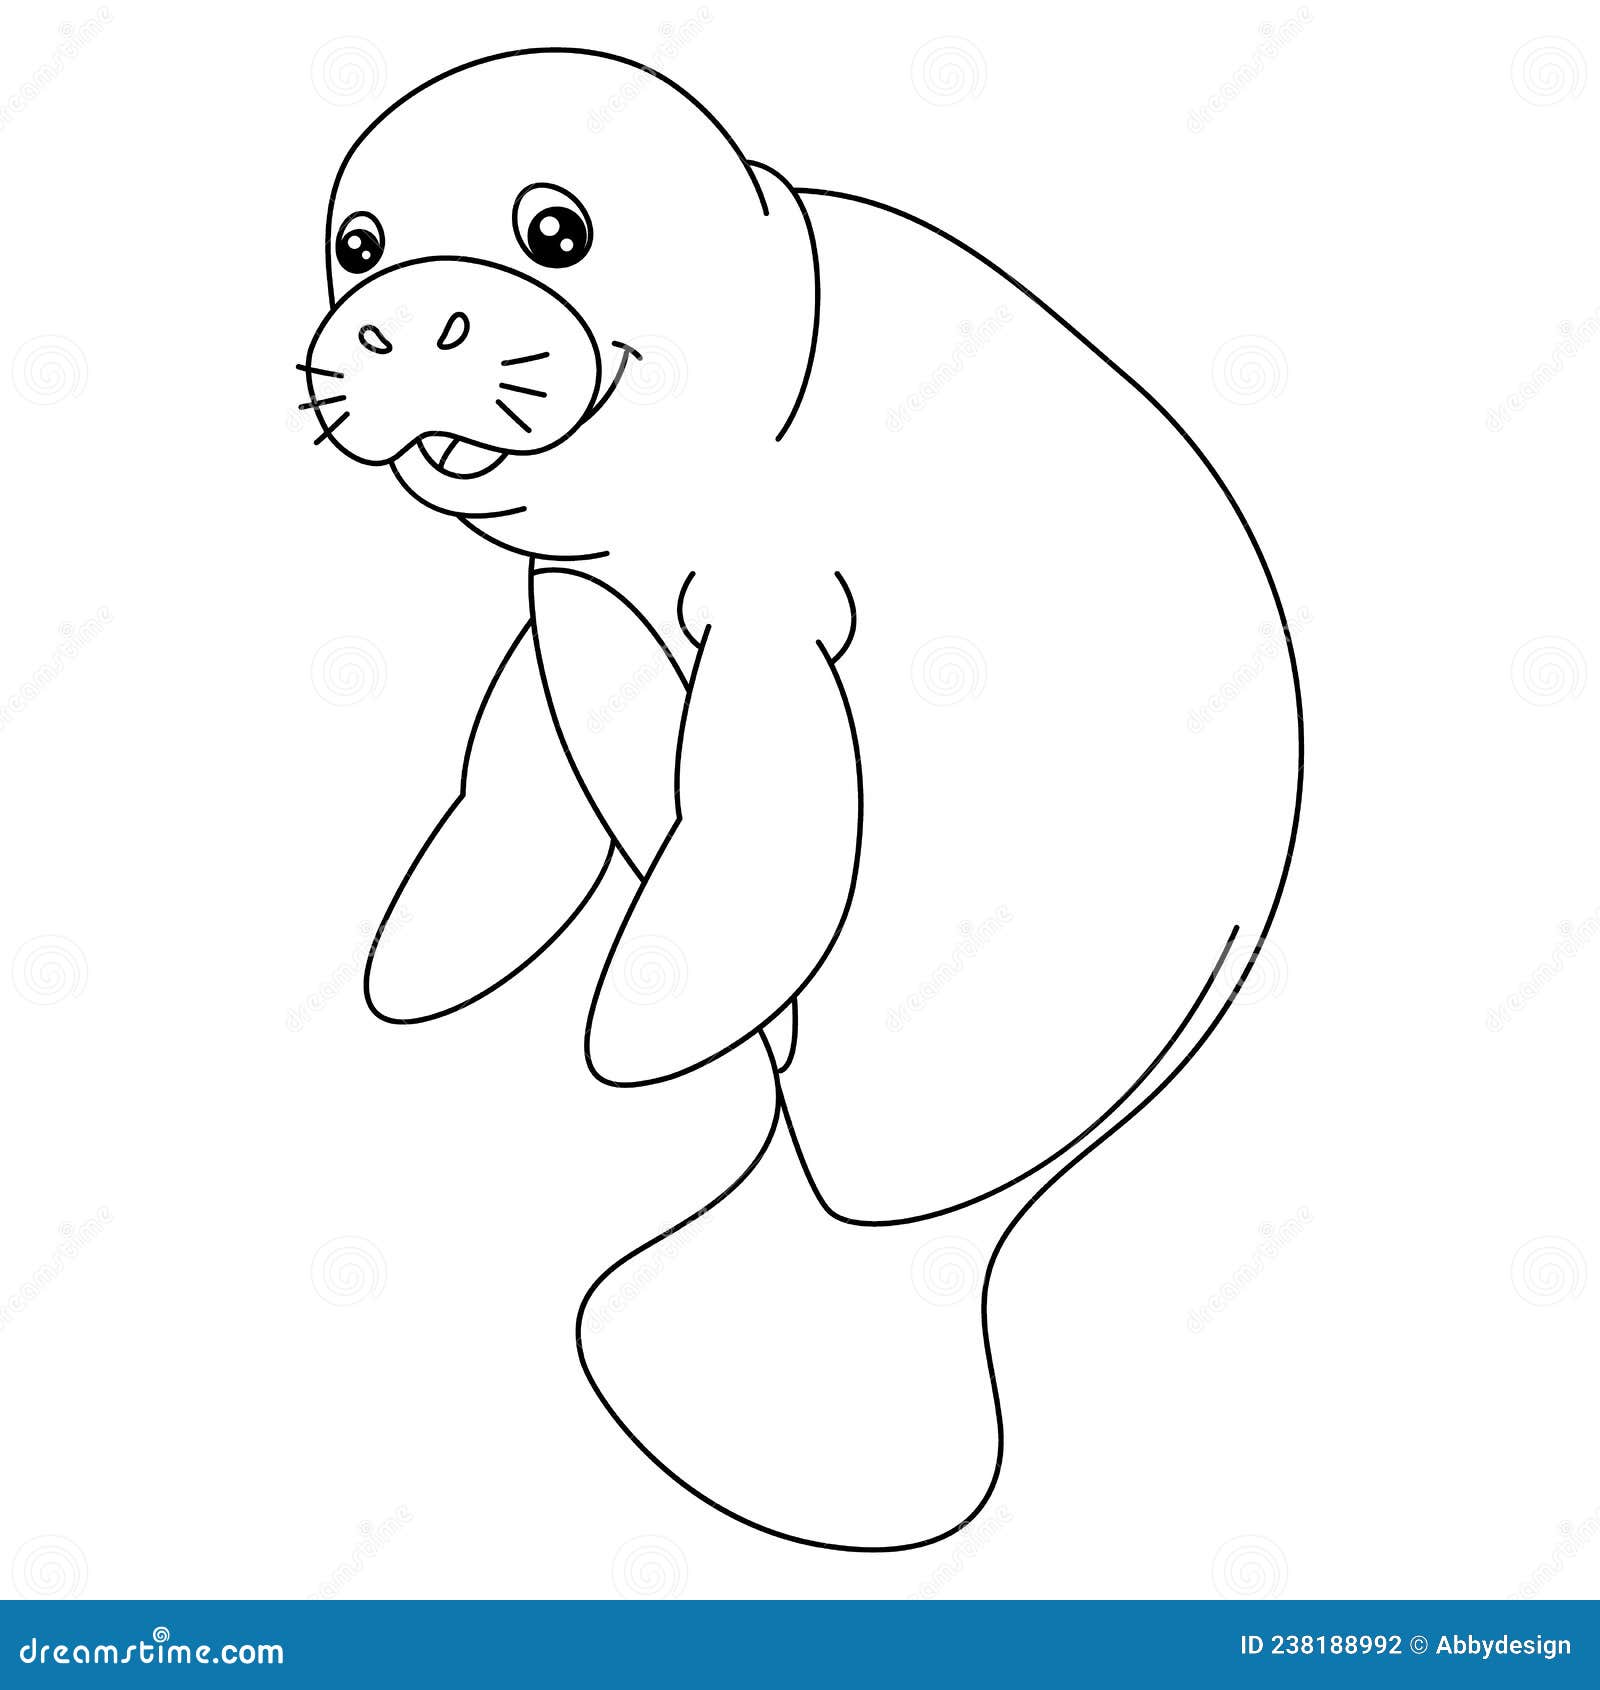 Manatee coloring page isolated for kids stock vector